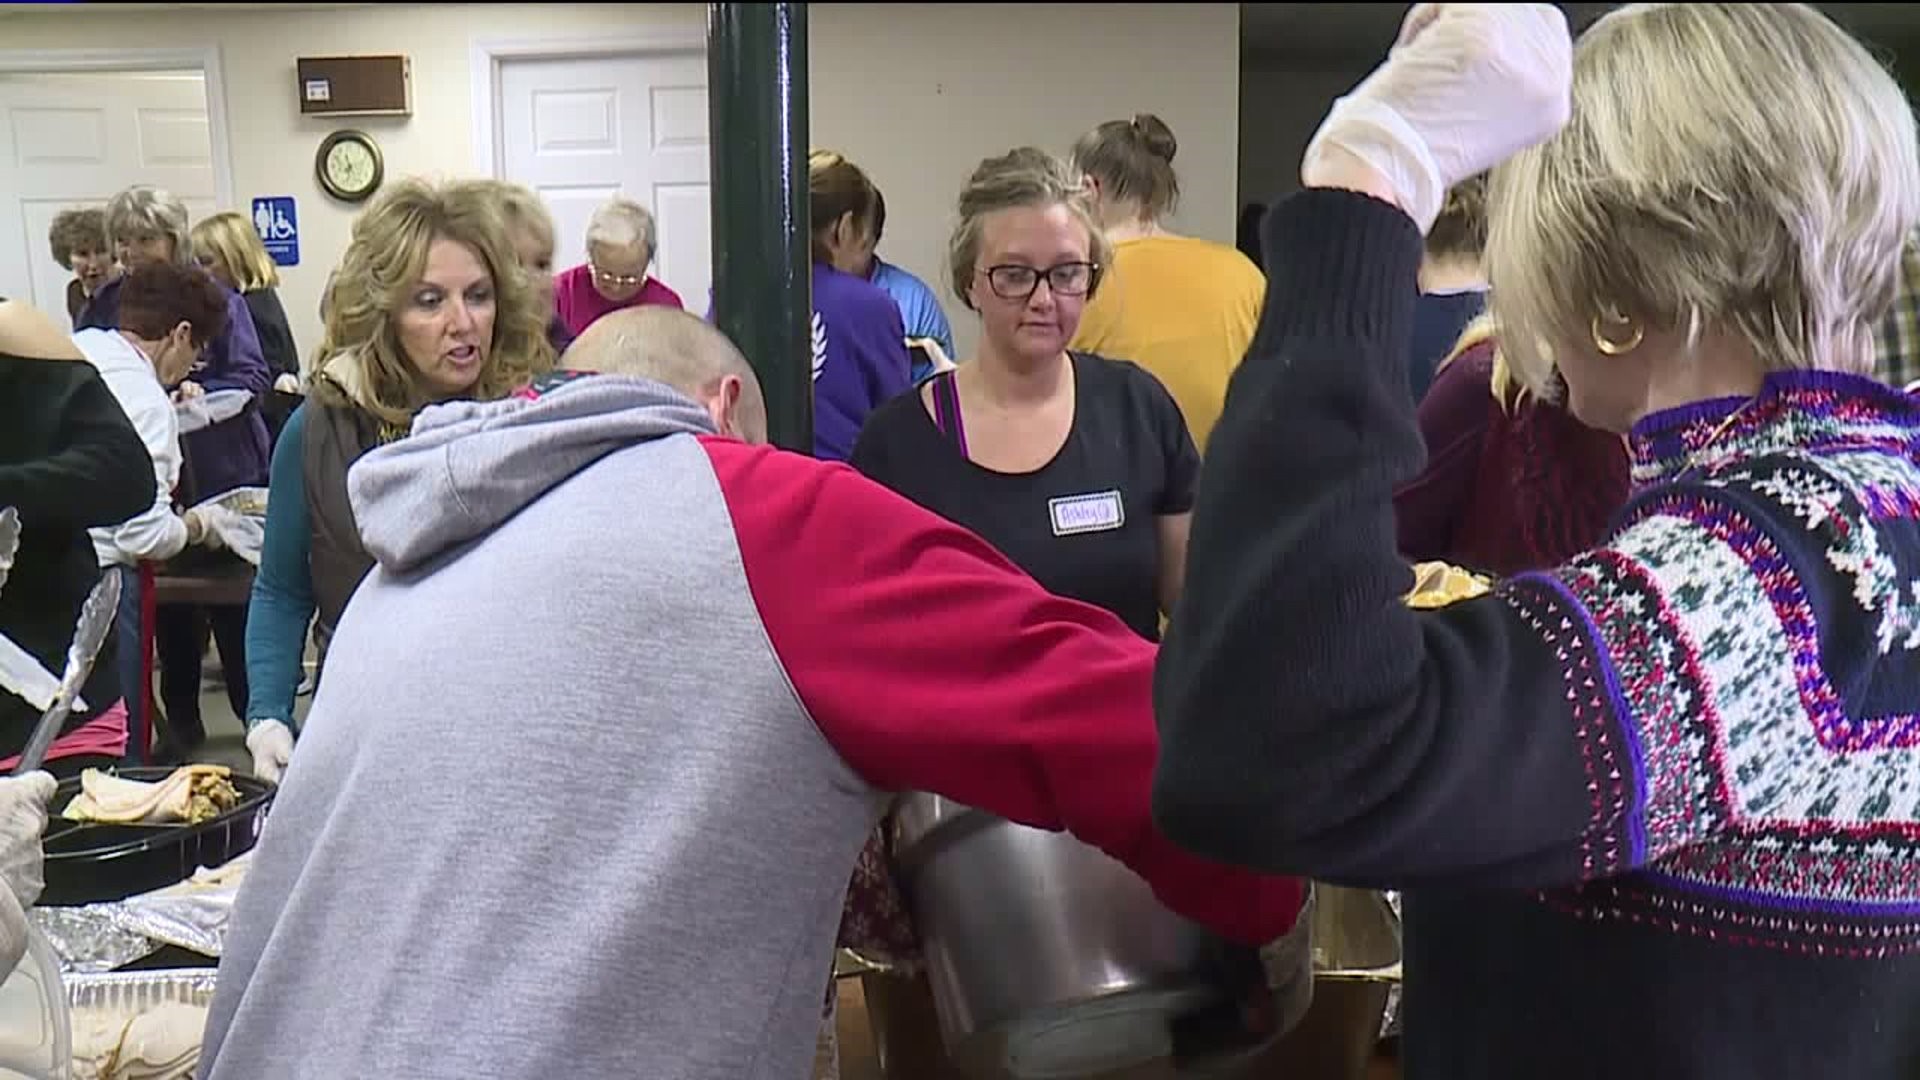 Thanksgiving Dinner Assembly Line Feeds More Than 1,000